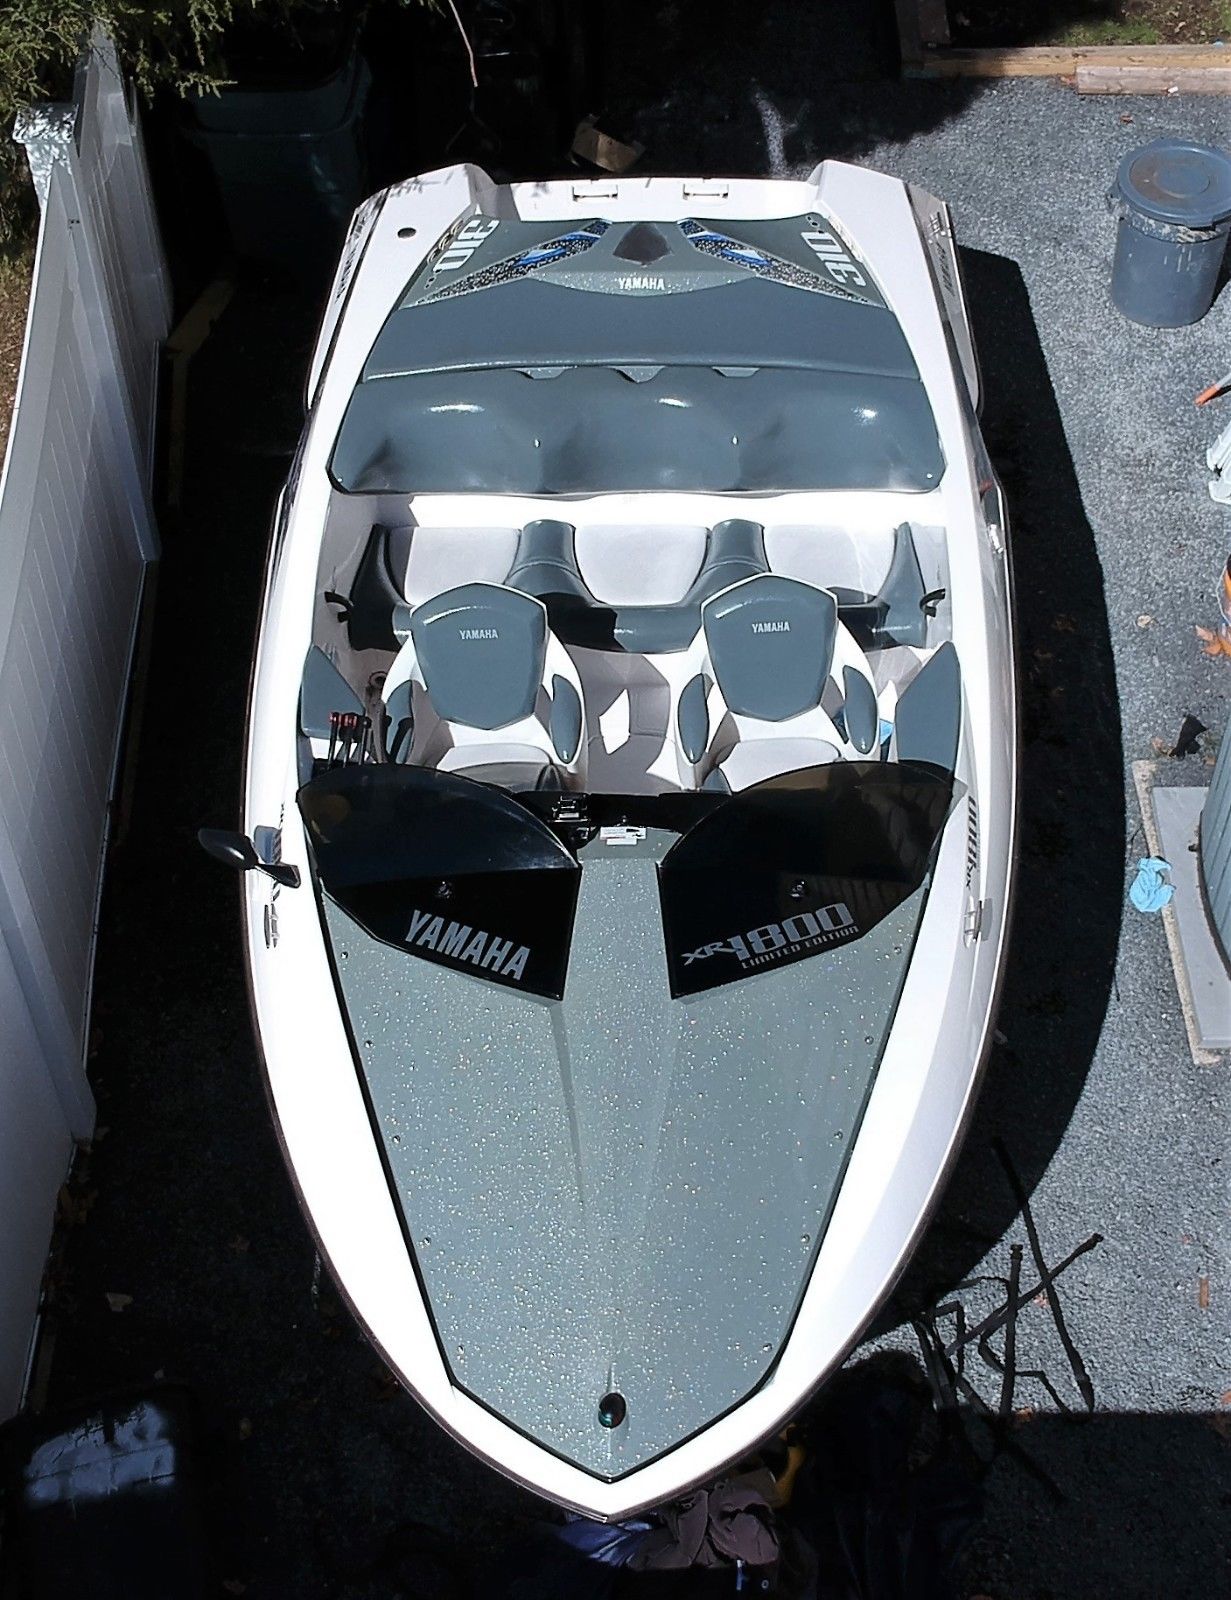 Yamaha XR1800 2001 for sale for $9,999 - Boats-from-USA.com